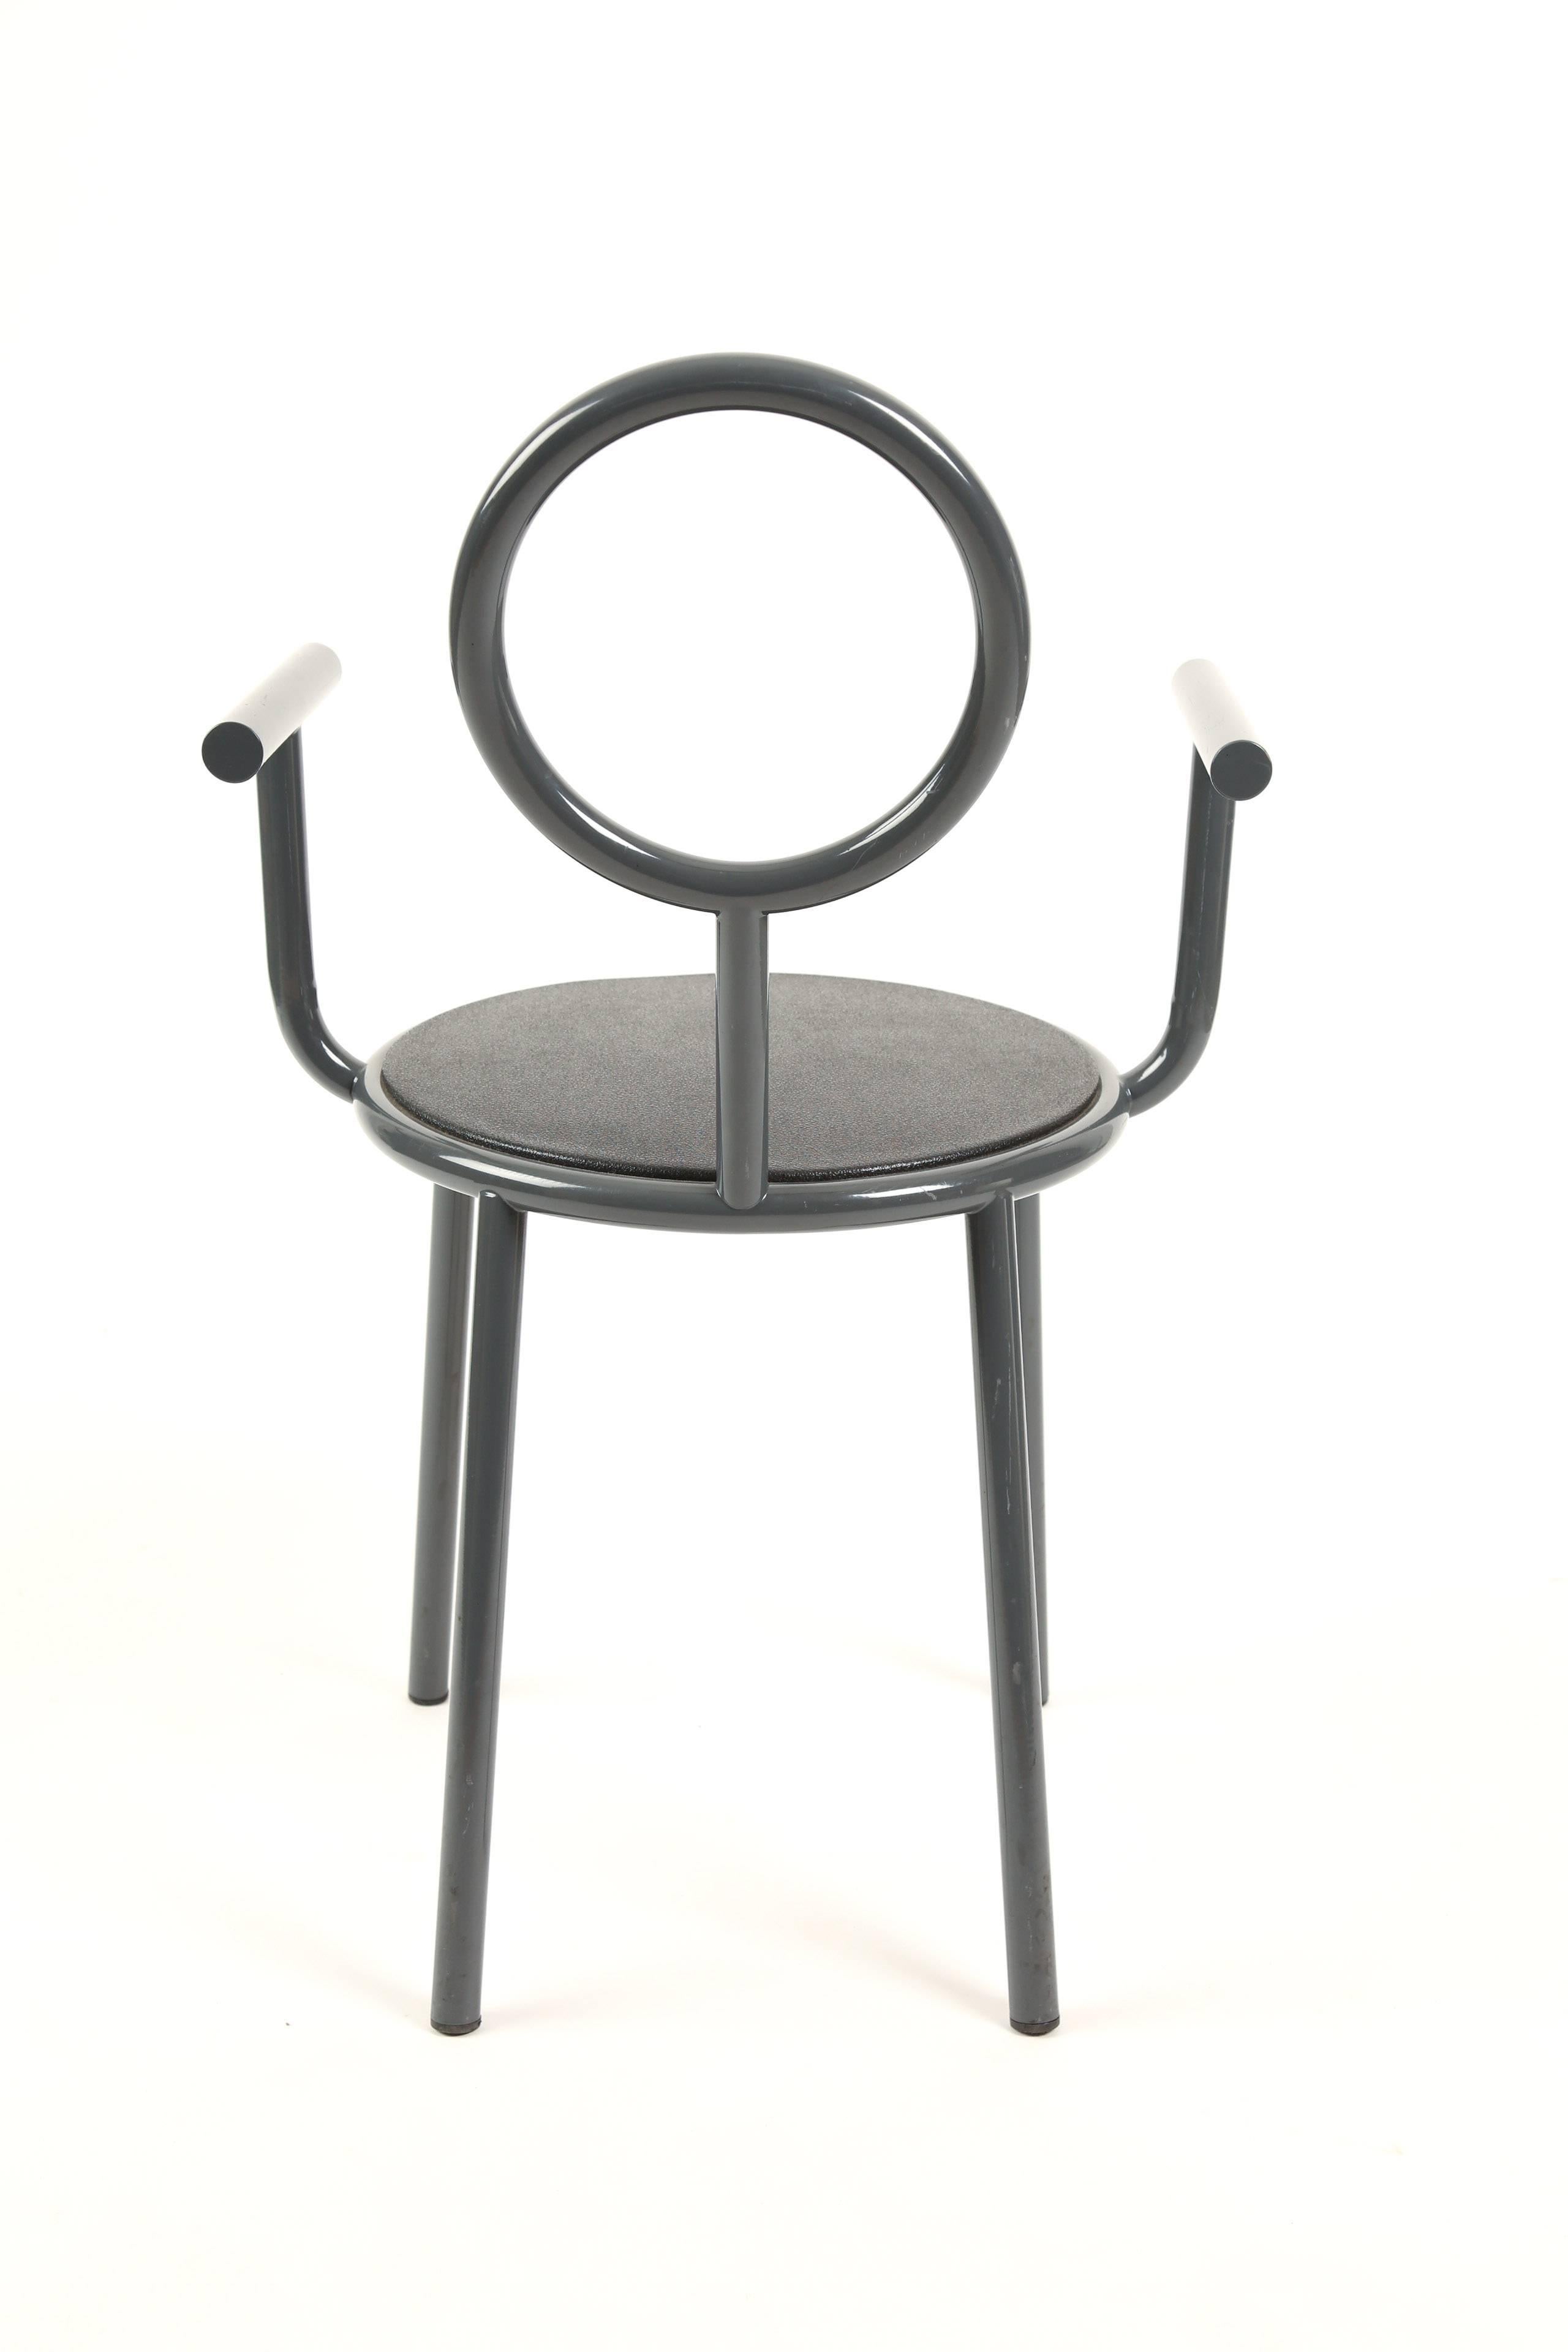 Stelline Memphis chairs. A set of four Memphis chairs. Designed by one of the founders of the Memphis Group, architect Alessandro Mendini (1933). The chairs gives a happy feeling, simple but characteristic for Mendini. Characteristic for Memphis